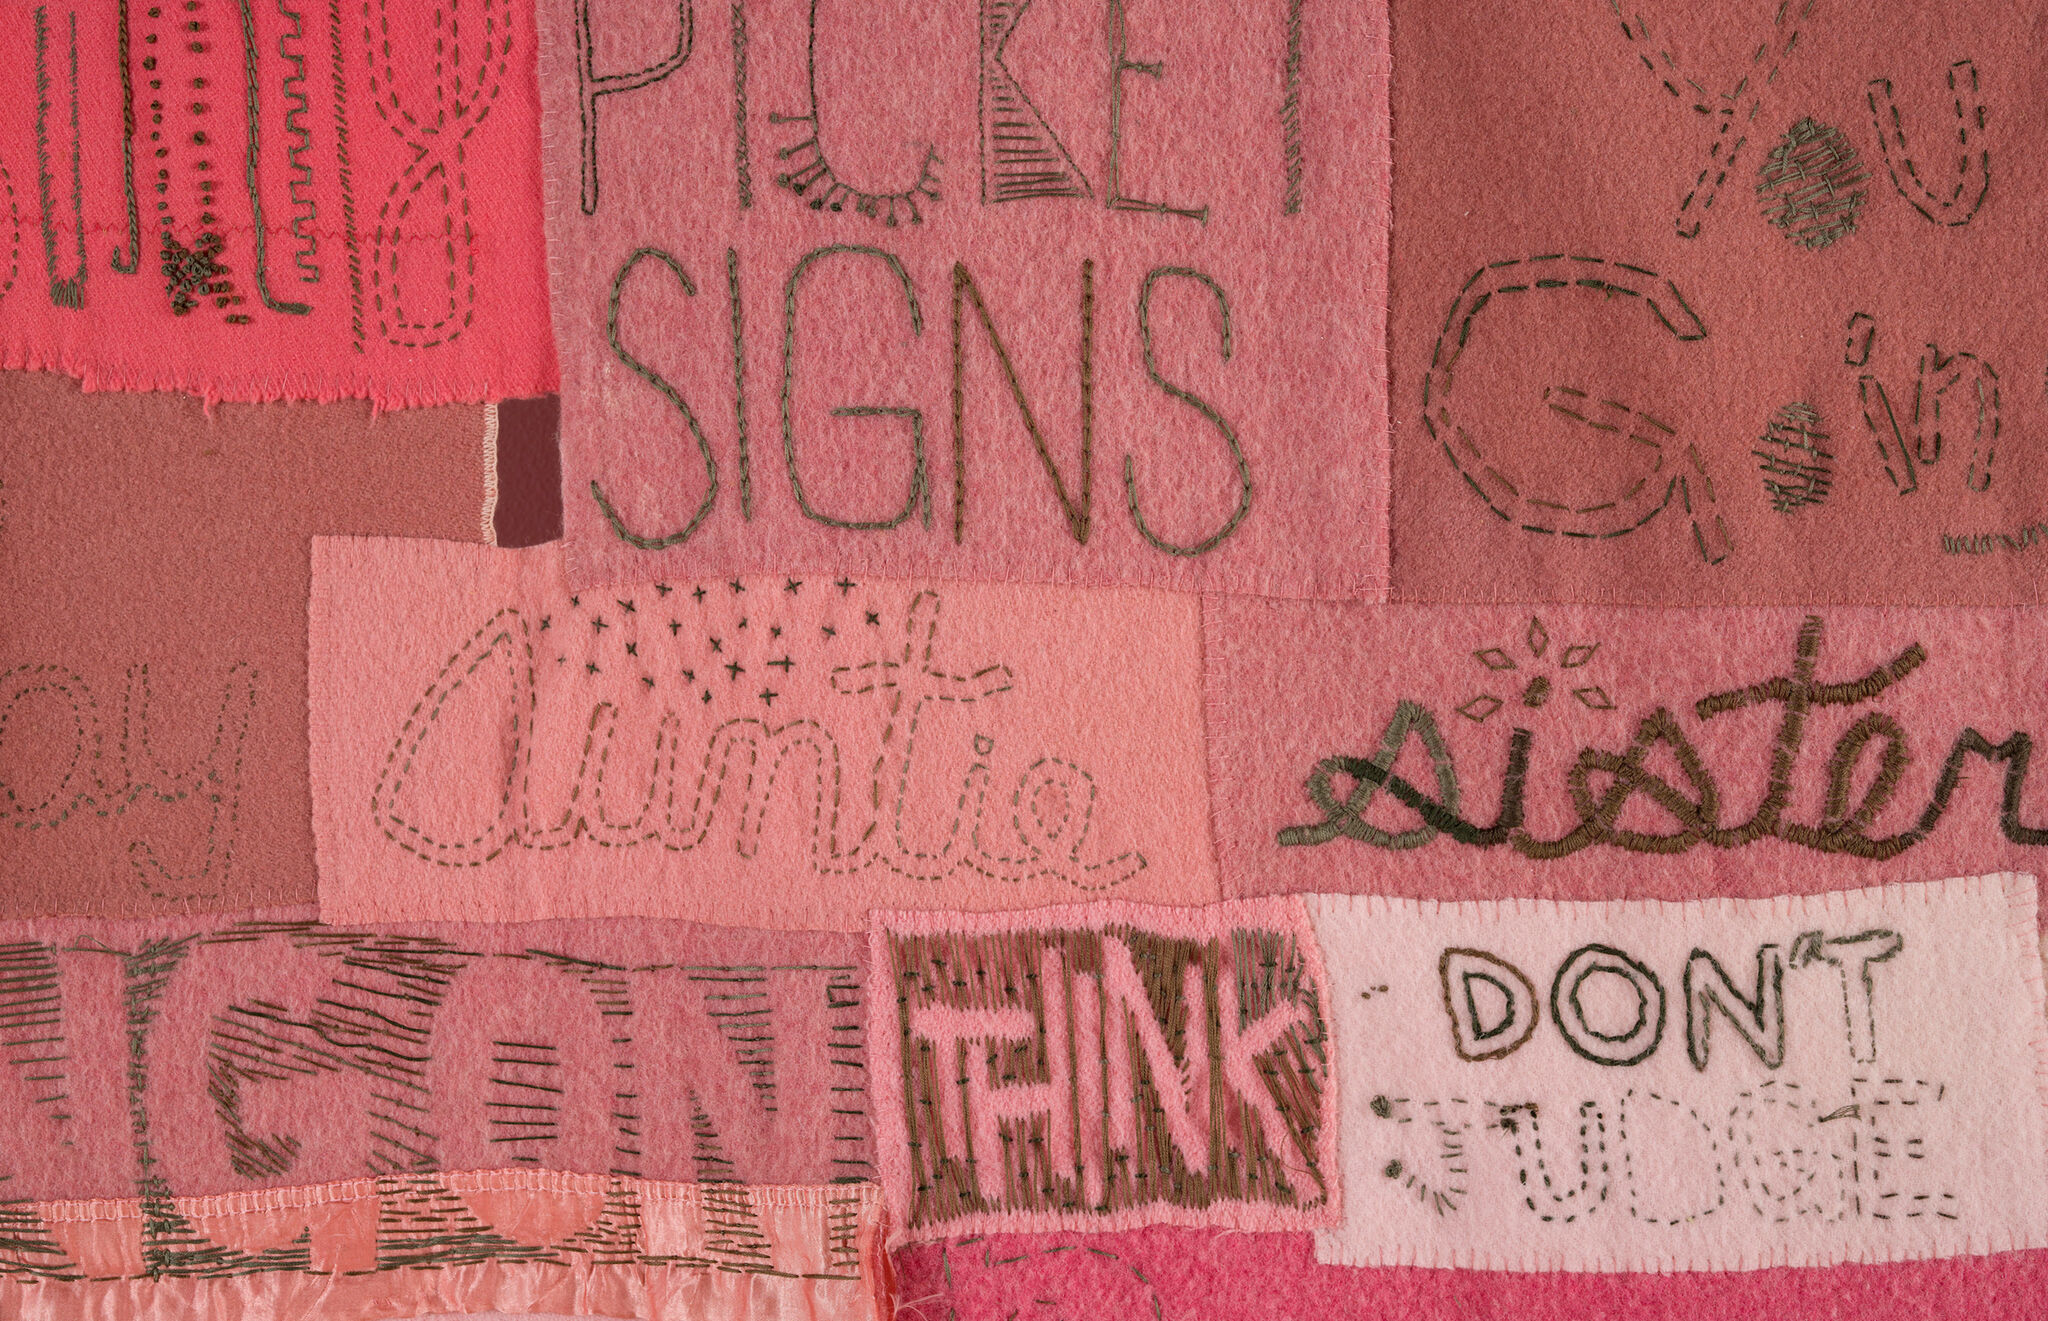 Rectangles of varying shades of pink fabric, stitched with words.